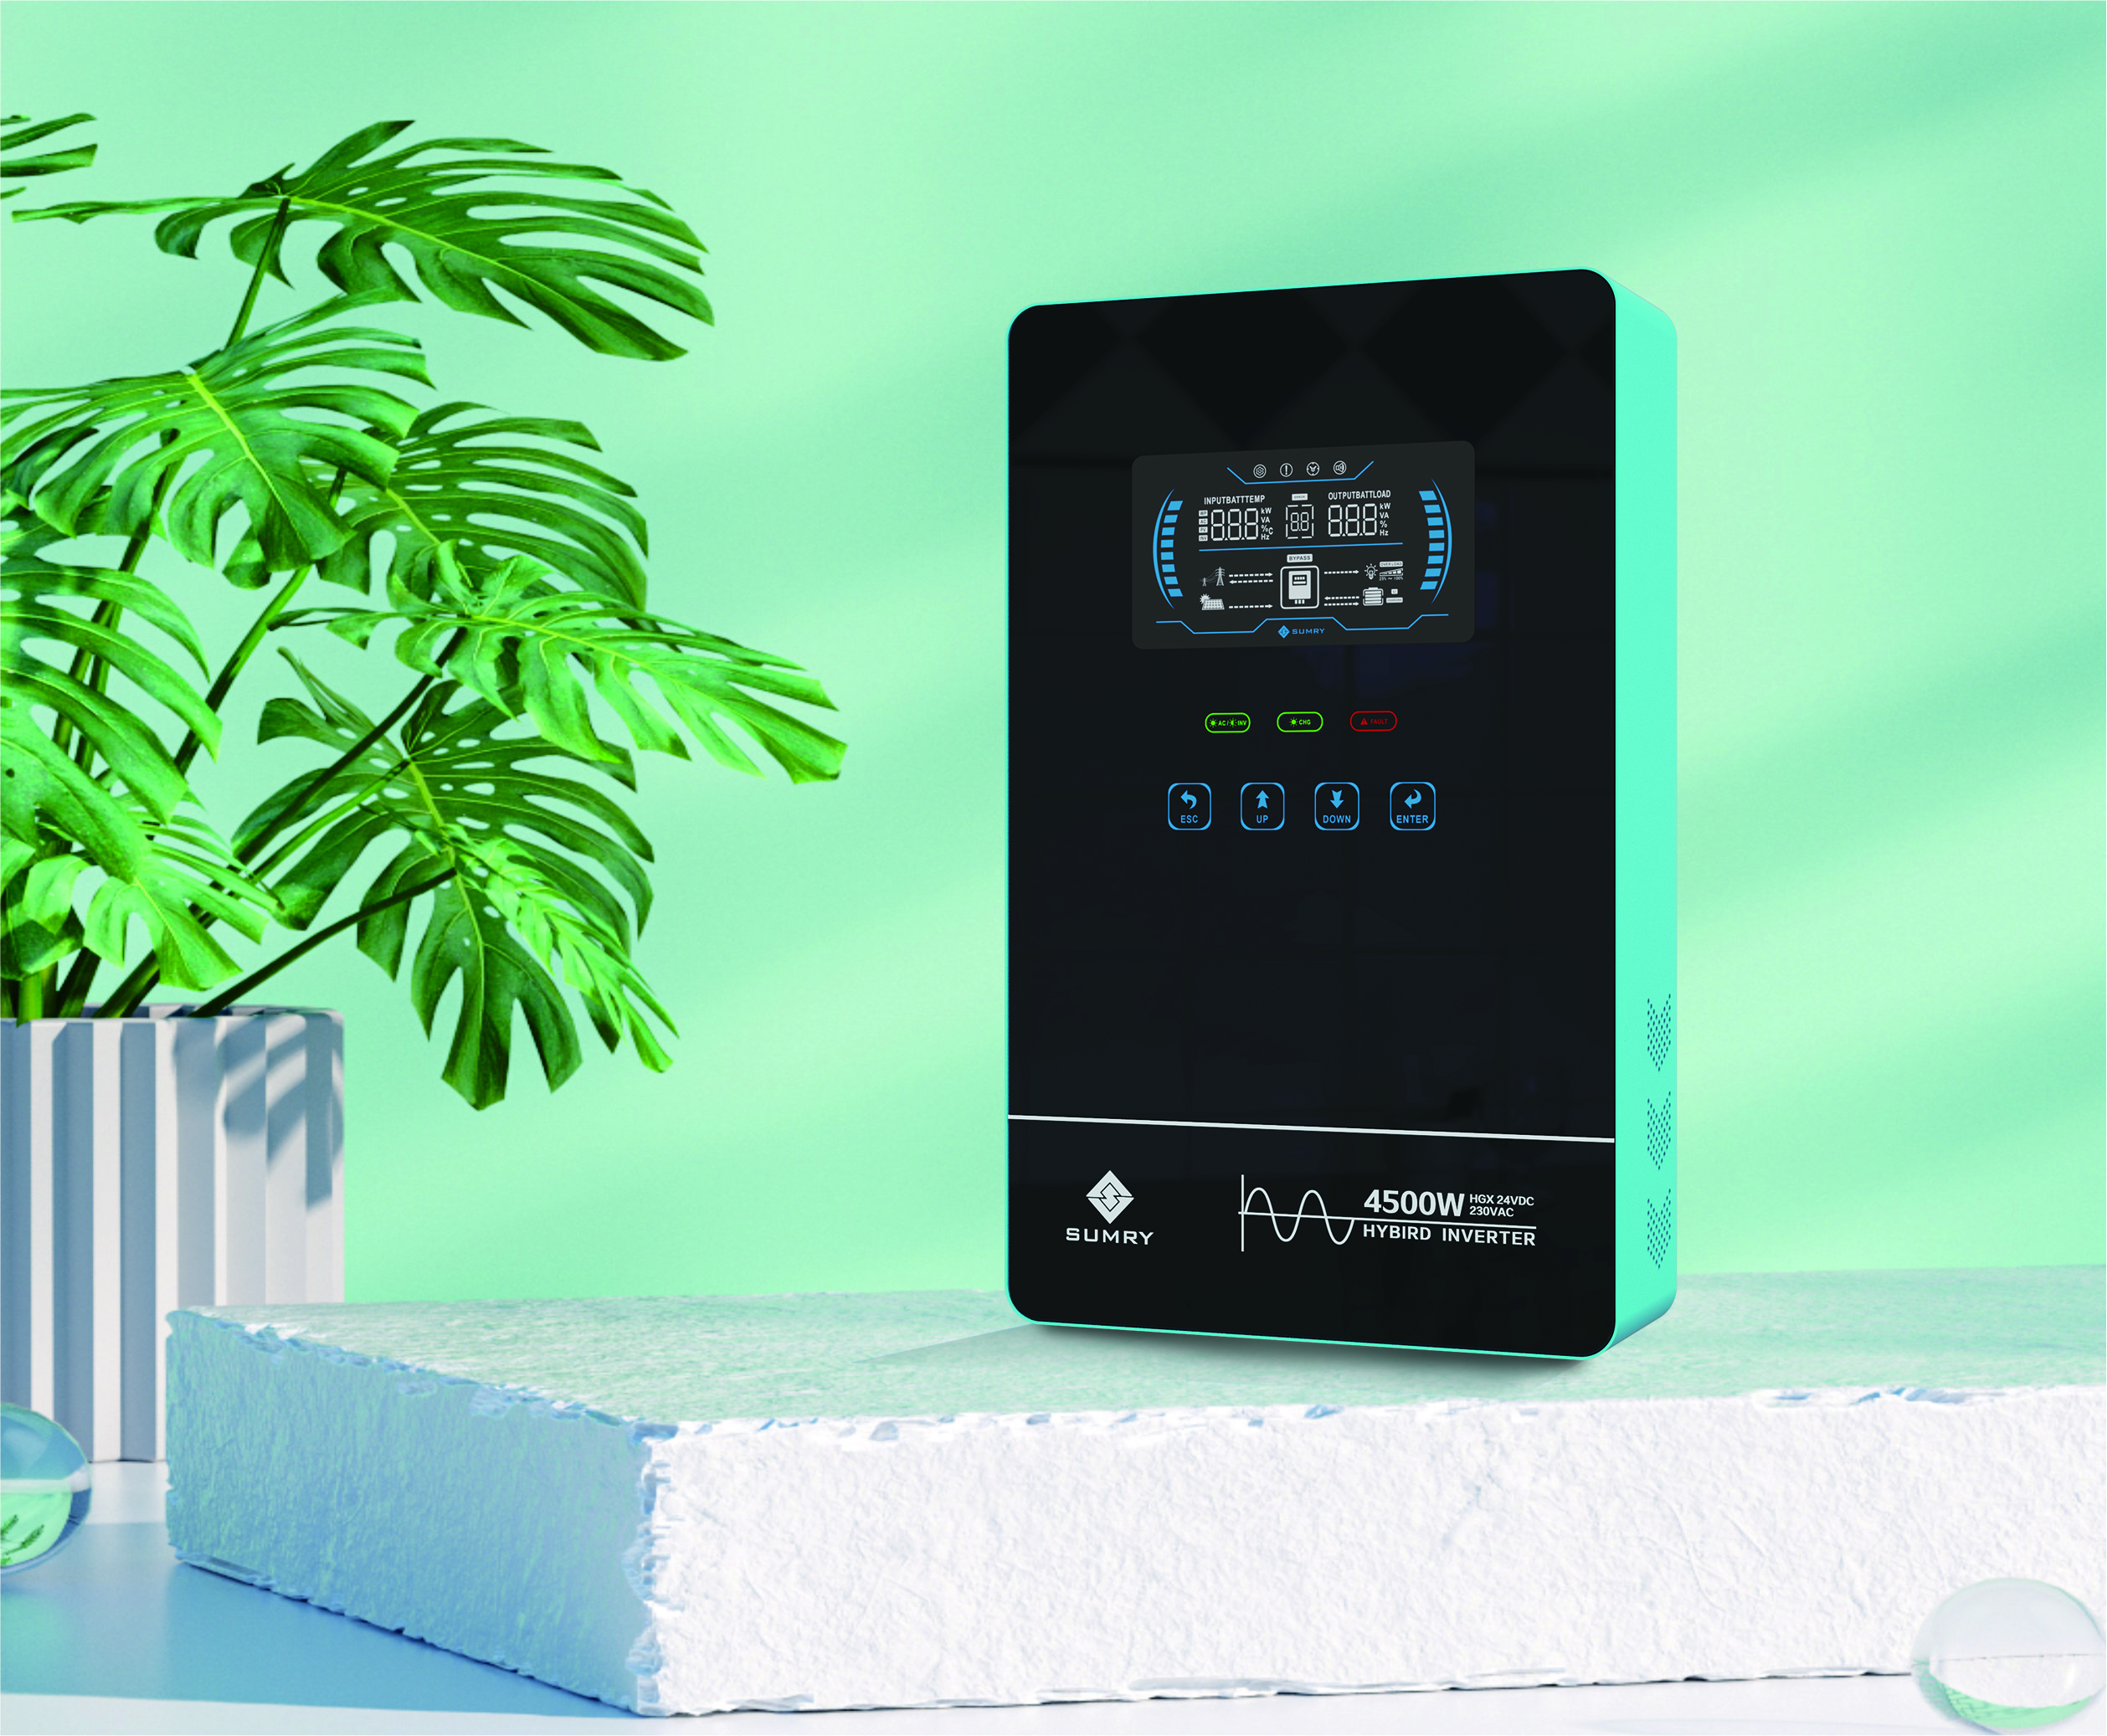 New arrivals | With both appearance and technology, Sumry opens a new era of home inverters